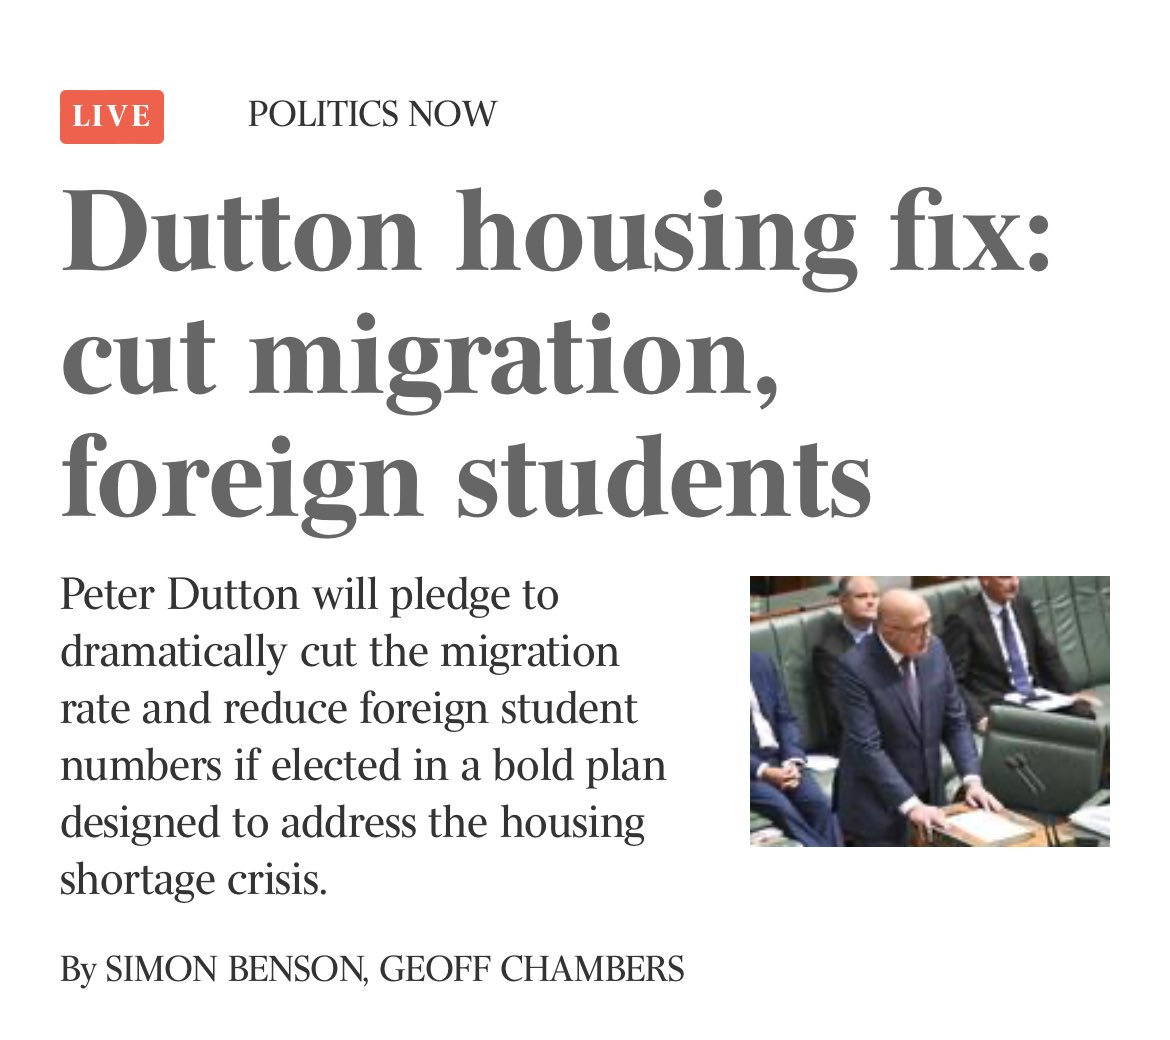 Dog whistle politics by Dutton.

The Coalition’s election pitch is to blame structural failings in the housing market on foreign students and migrants. Ignoring decades of non-investment by the Commonwealth in public housing that caused the crisis.

Let’s be better than that.